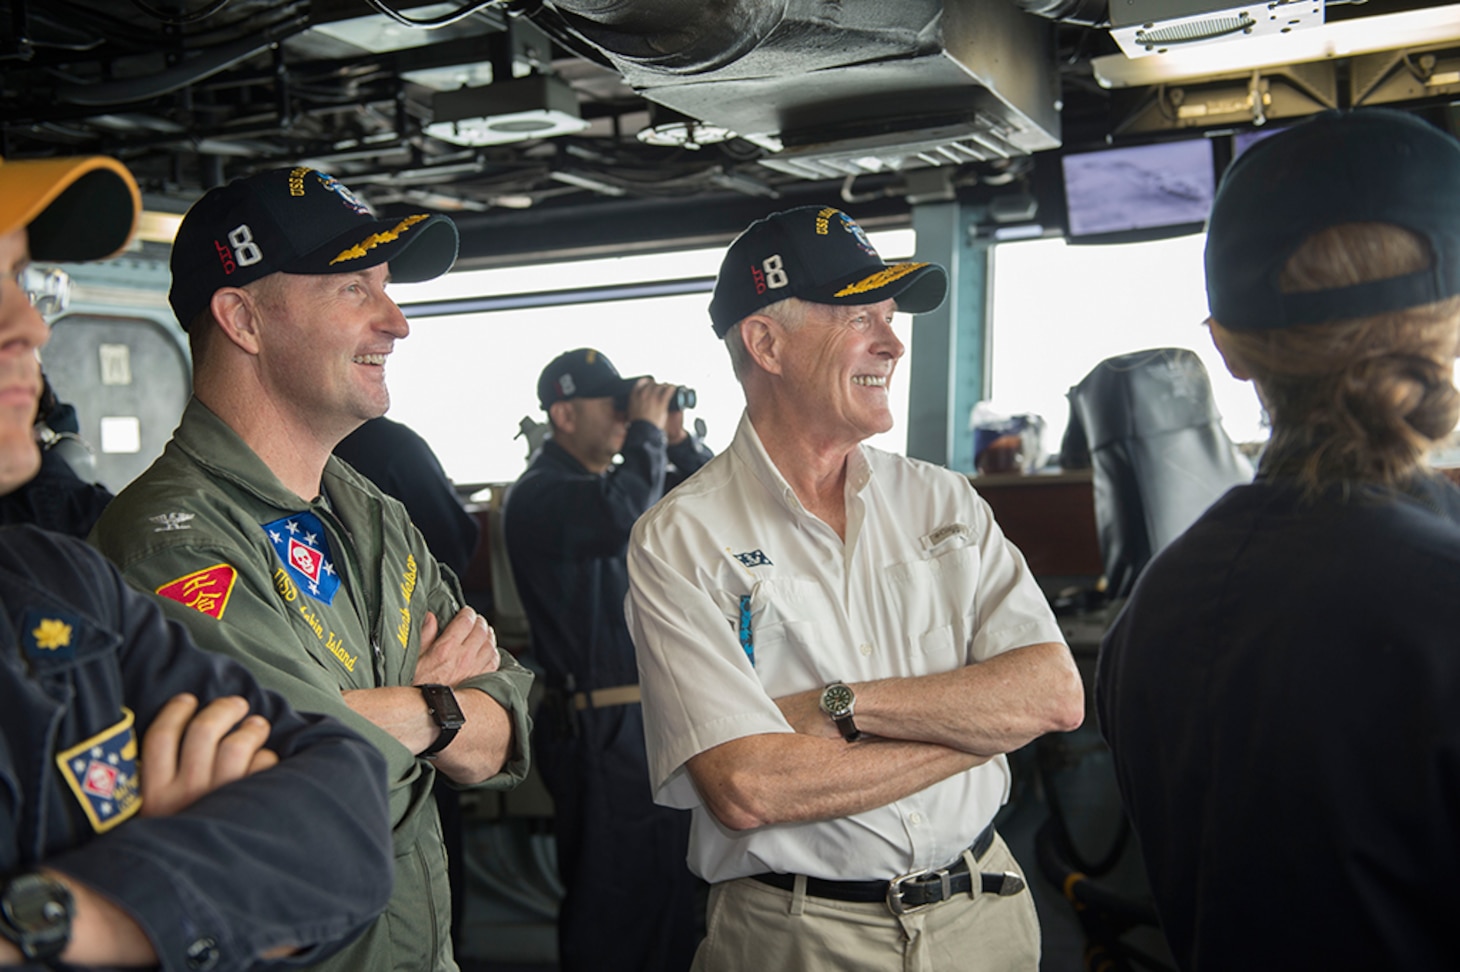 Secretary of the Navy (SECNAV), the Honorable Ray Mabus, right, and USS Makin Island (LHD 8) Commanding Officer Capt. Mark A. Melson observe Makin Island’s Strait of Malacca transit from the bridge after the ship’s departure from Changi Naval Base, Singapore.  Mabus was aboard Makin Island as part of a visit to the Pacific and Central Command areas of responsibility to meet with Sailors, Marines, and military and government officials. Makin Island, the flagship of the Makin Island Amphibious Ready Group, is operating in the U.S. 7th Fleet area of operations with the embarked 11th Marine Expeditionary Unit in support of security and stability in the Indo-Asia-Pacific region.